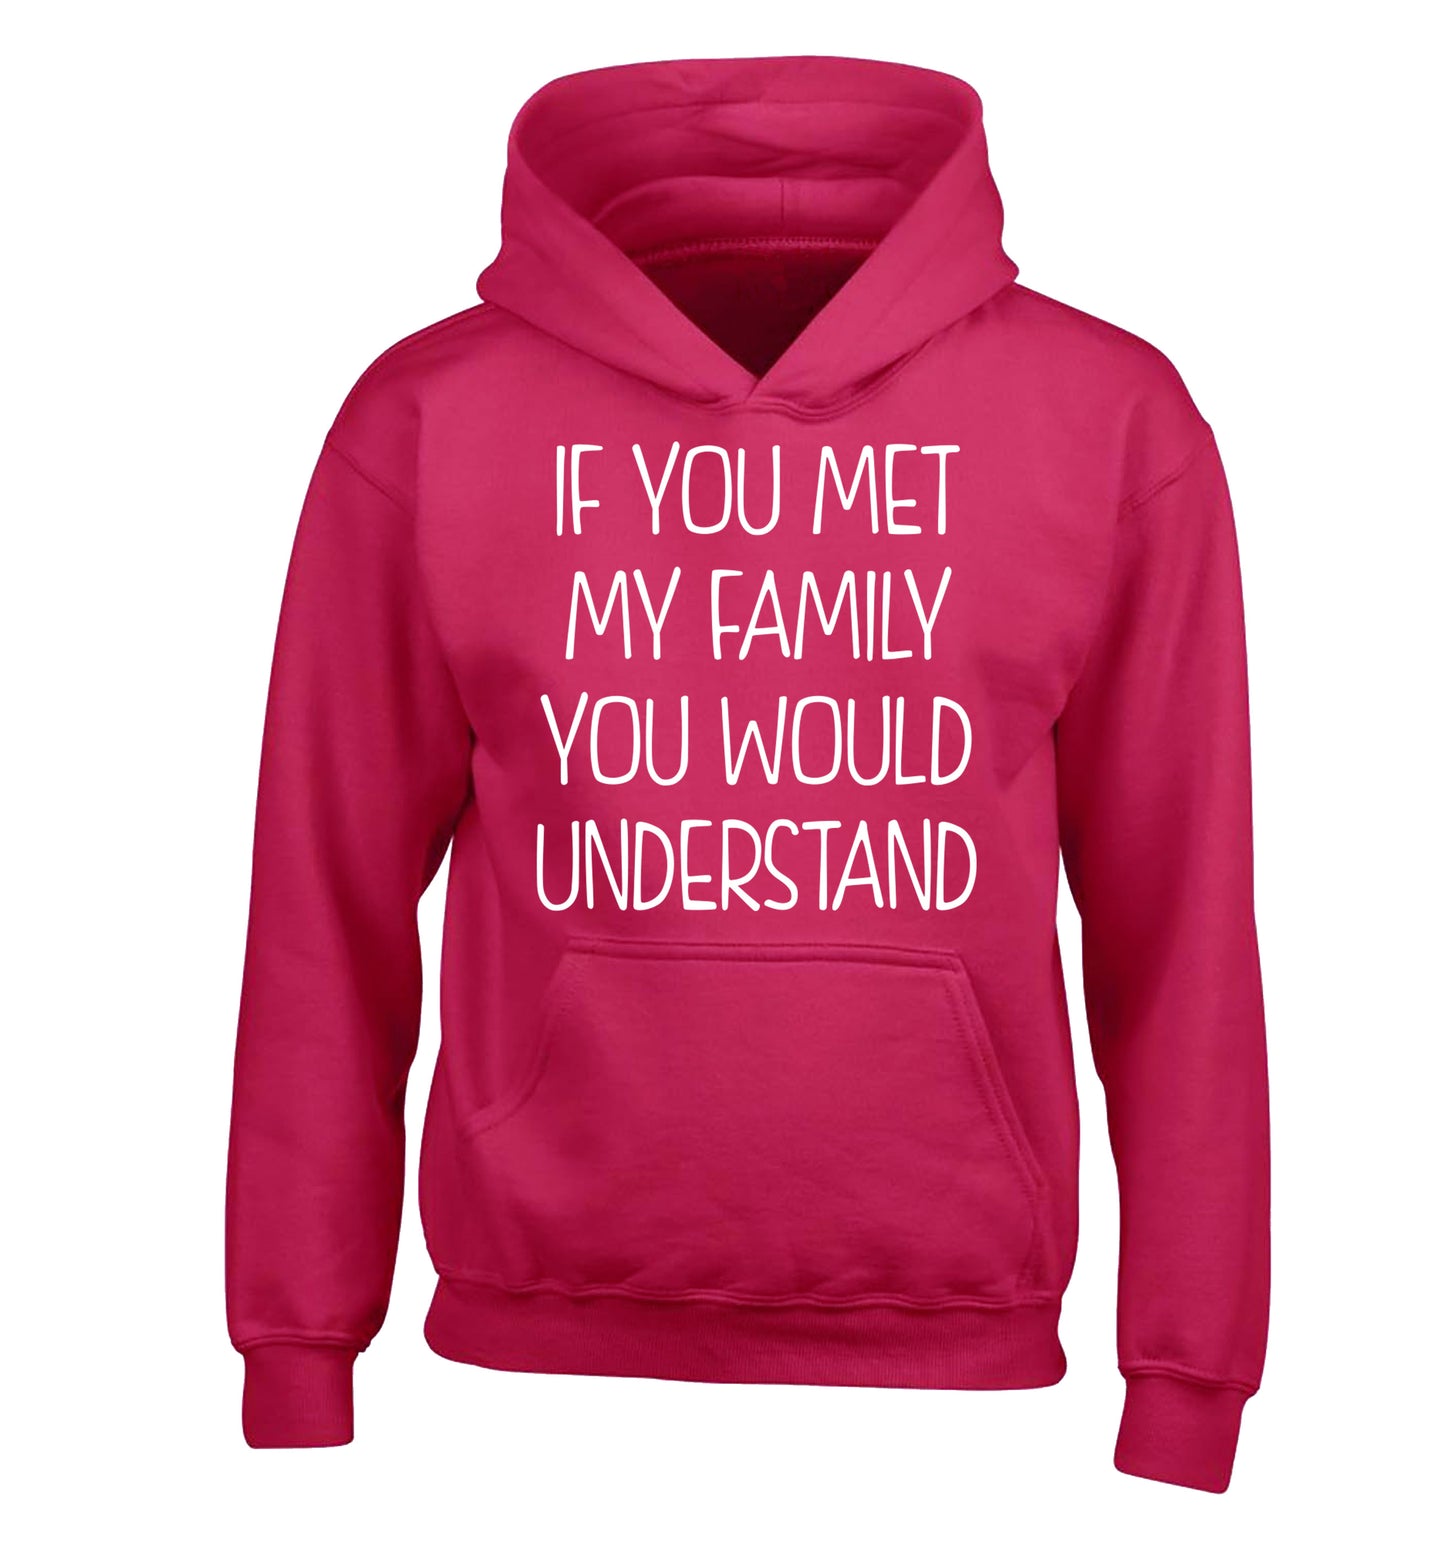 If you met my family you would understand children's pink hoodie 12-13 Years